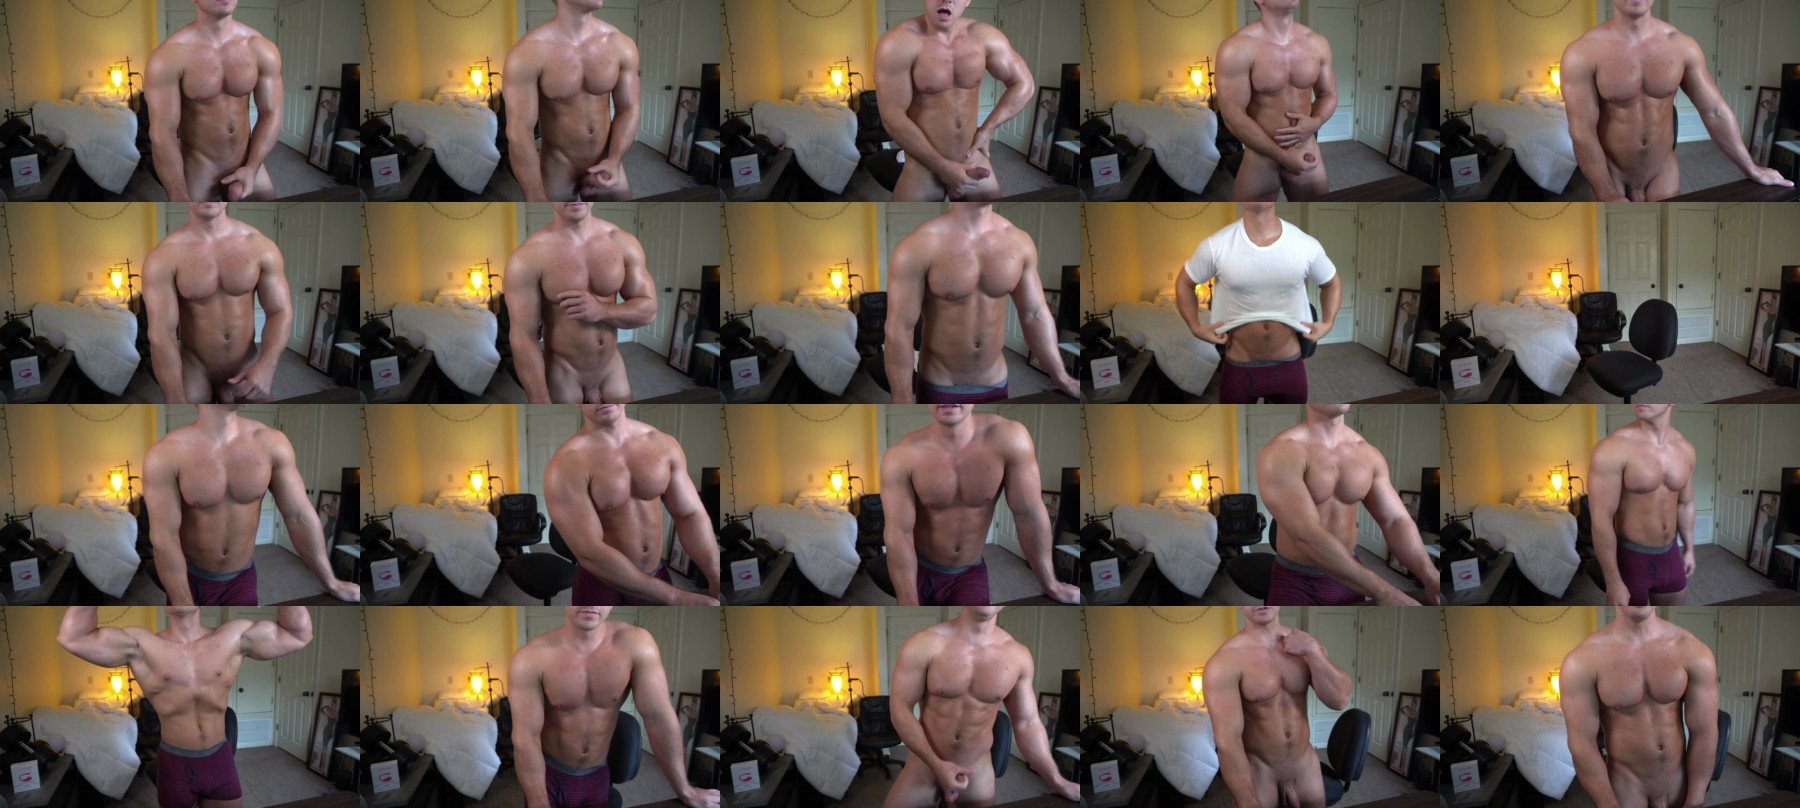 Hotmuscles6t9 Recorded CAM SHOW @ Chaturbate 07-06-2021